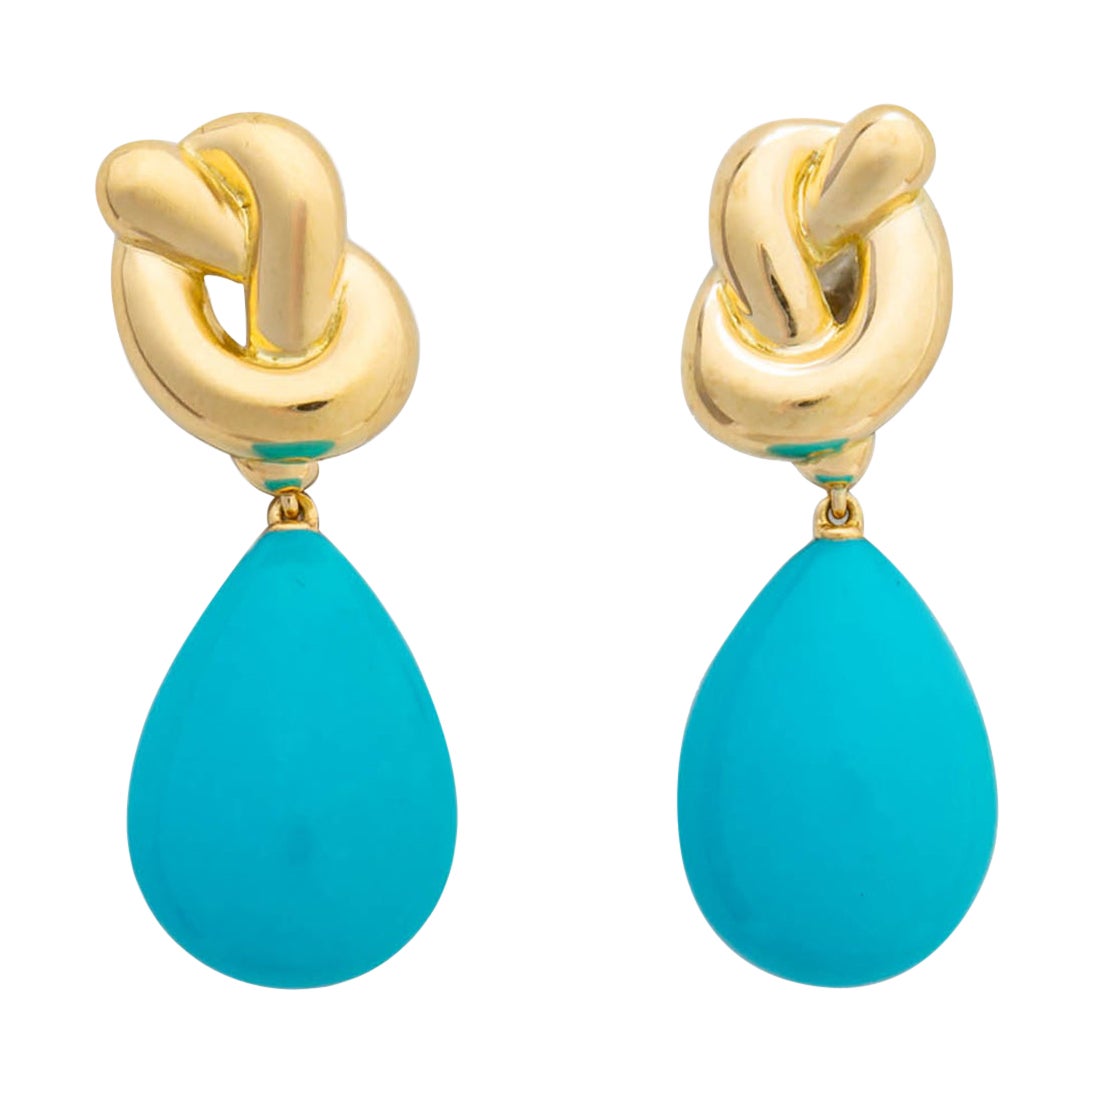 Angela Cummings Gold and Turquoise Drop Earrings